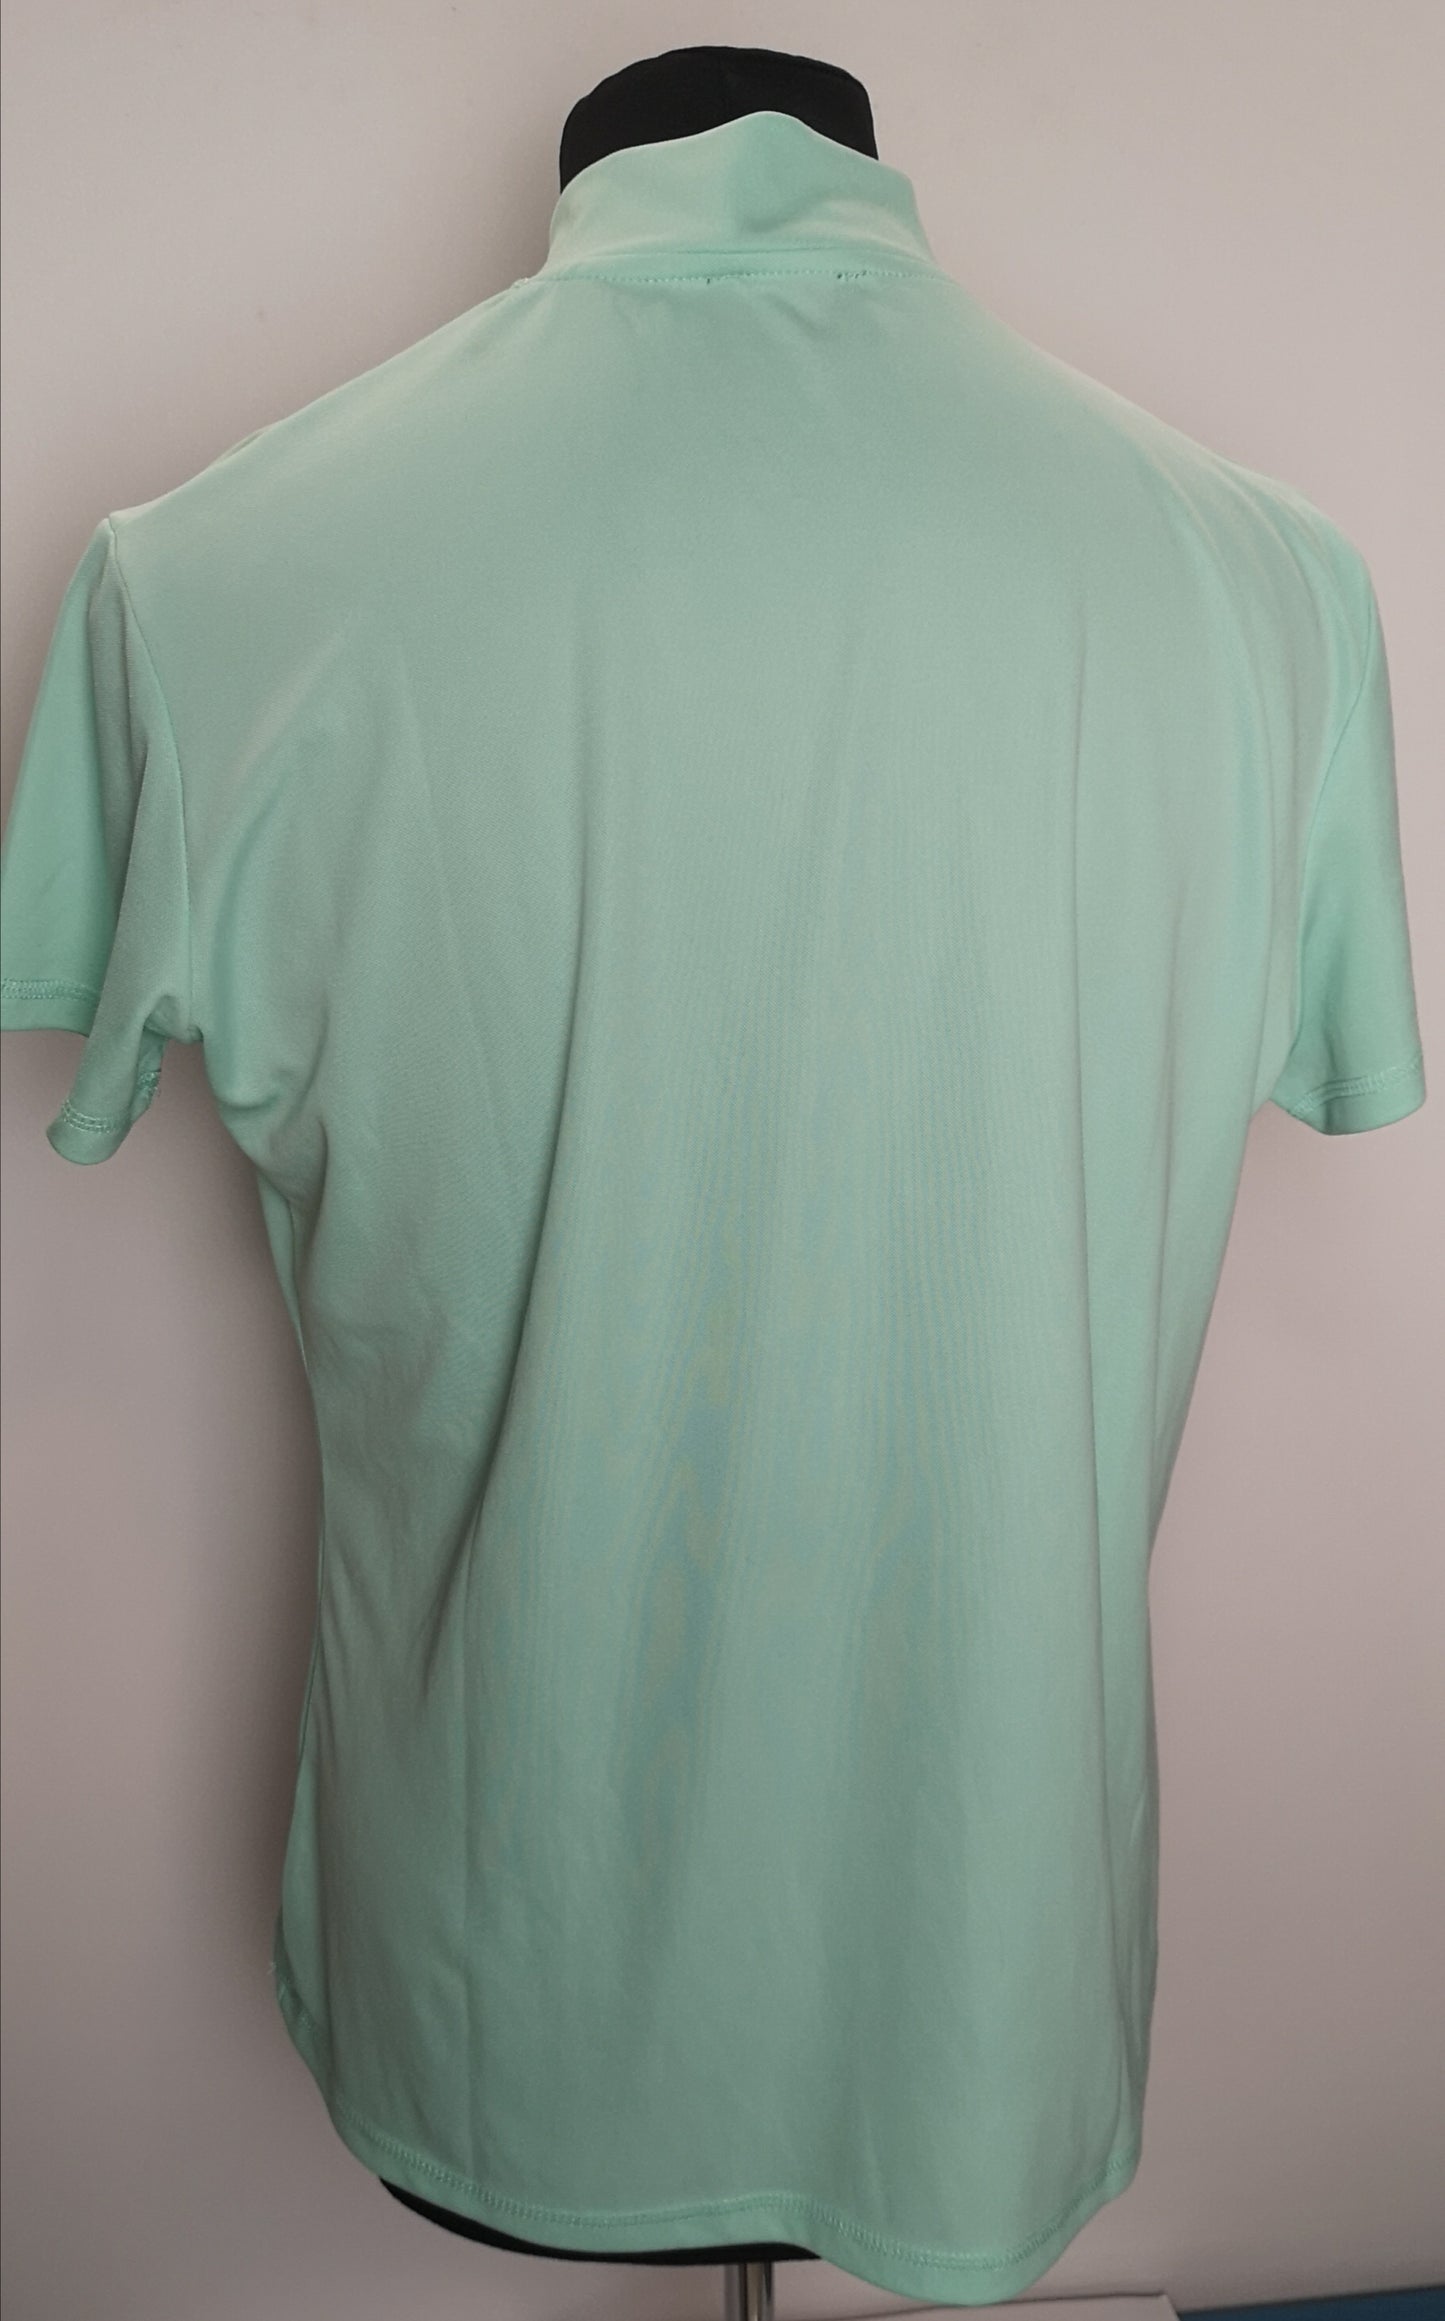 BNWT HKM Pro Team Equestrian Short Sleeve Turquoise Slim Fit Base Layer Size XL